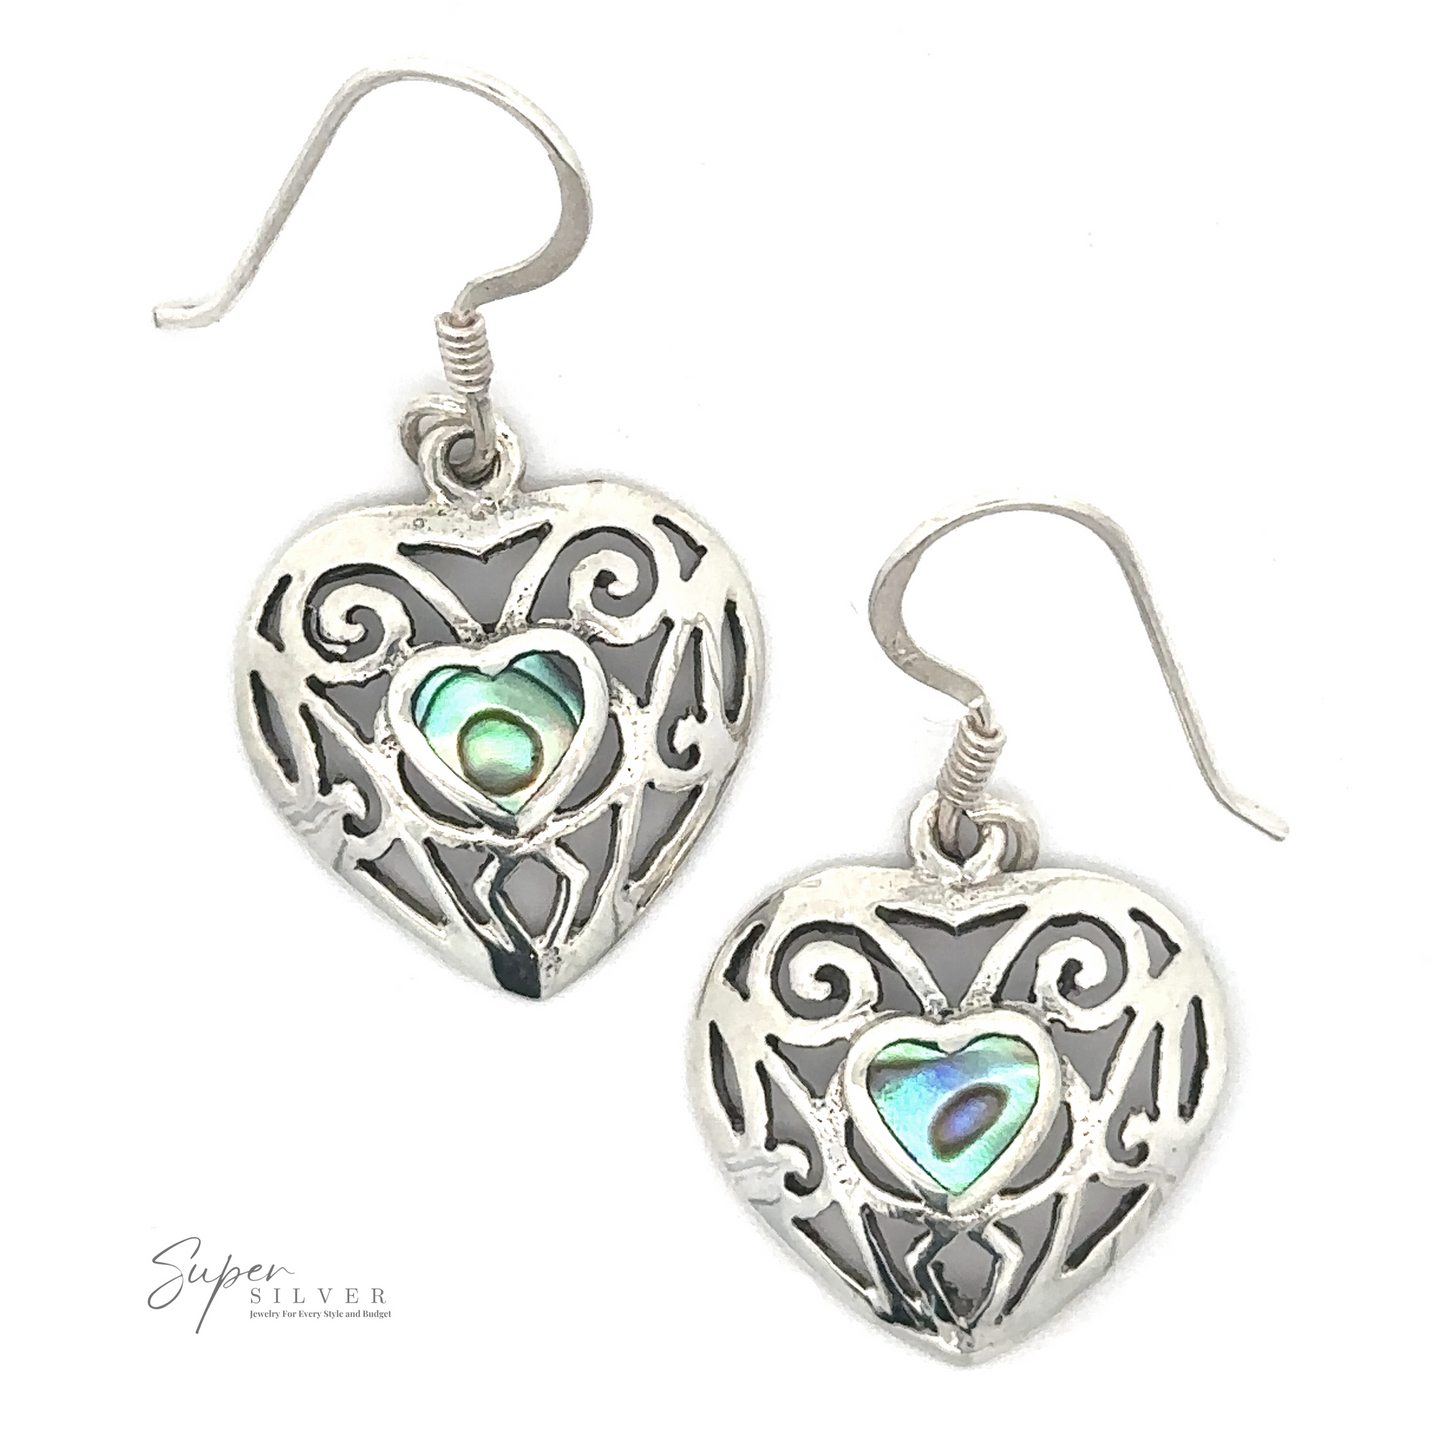 Heart-shaped sterling silver earrings with intricate designs and a small green and purple abalone shell in the center. Elegant Heart Shaped Abalone Earrings branding is visible in the bottom left corner.